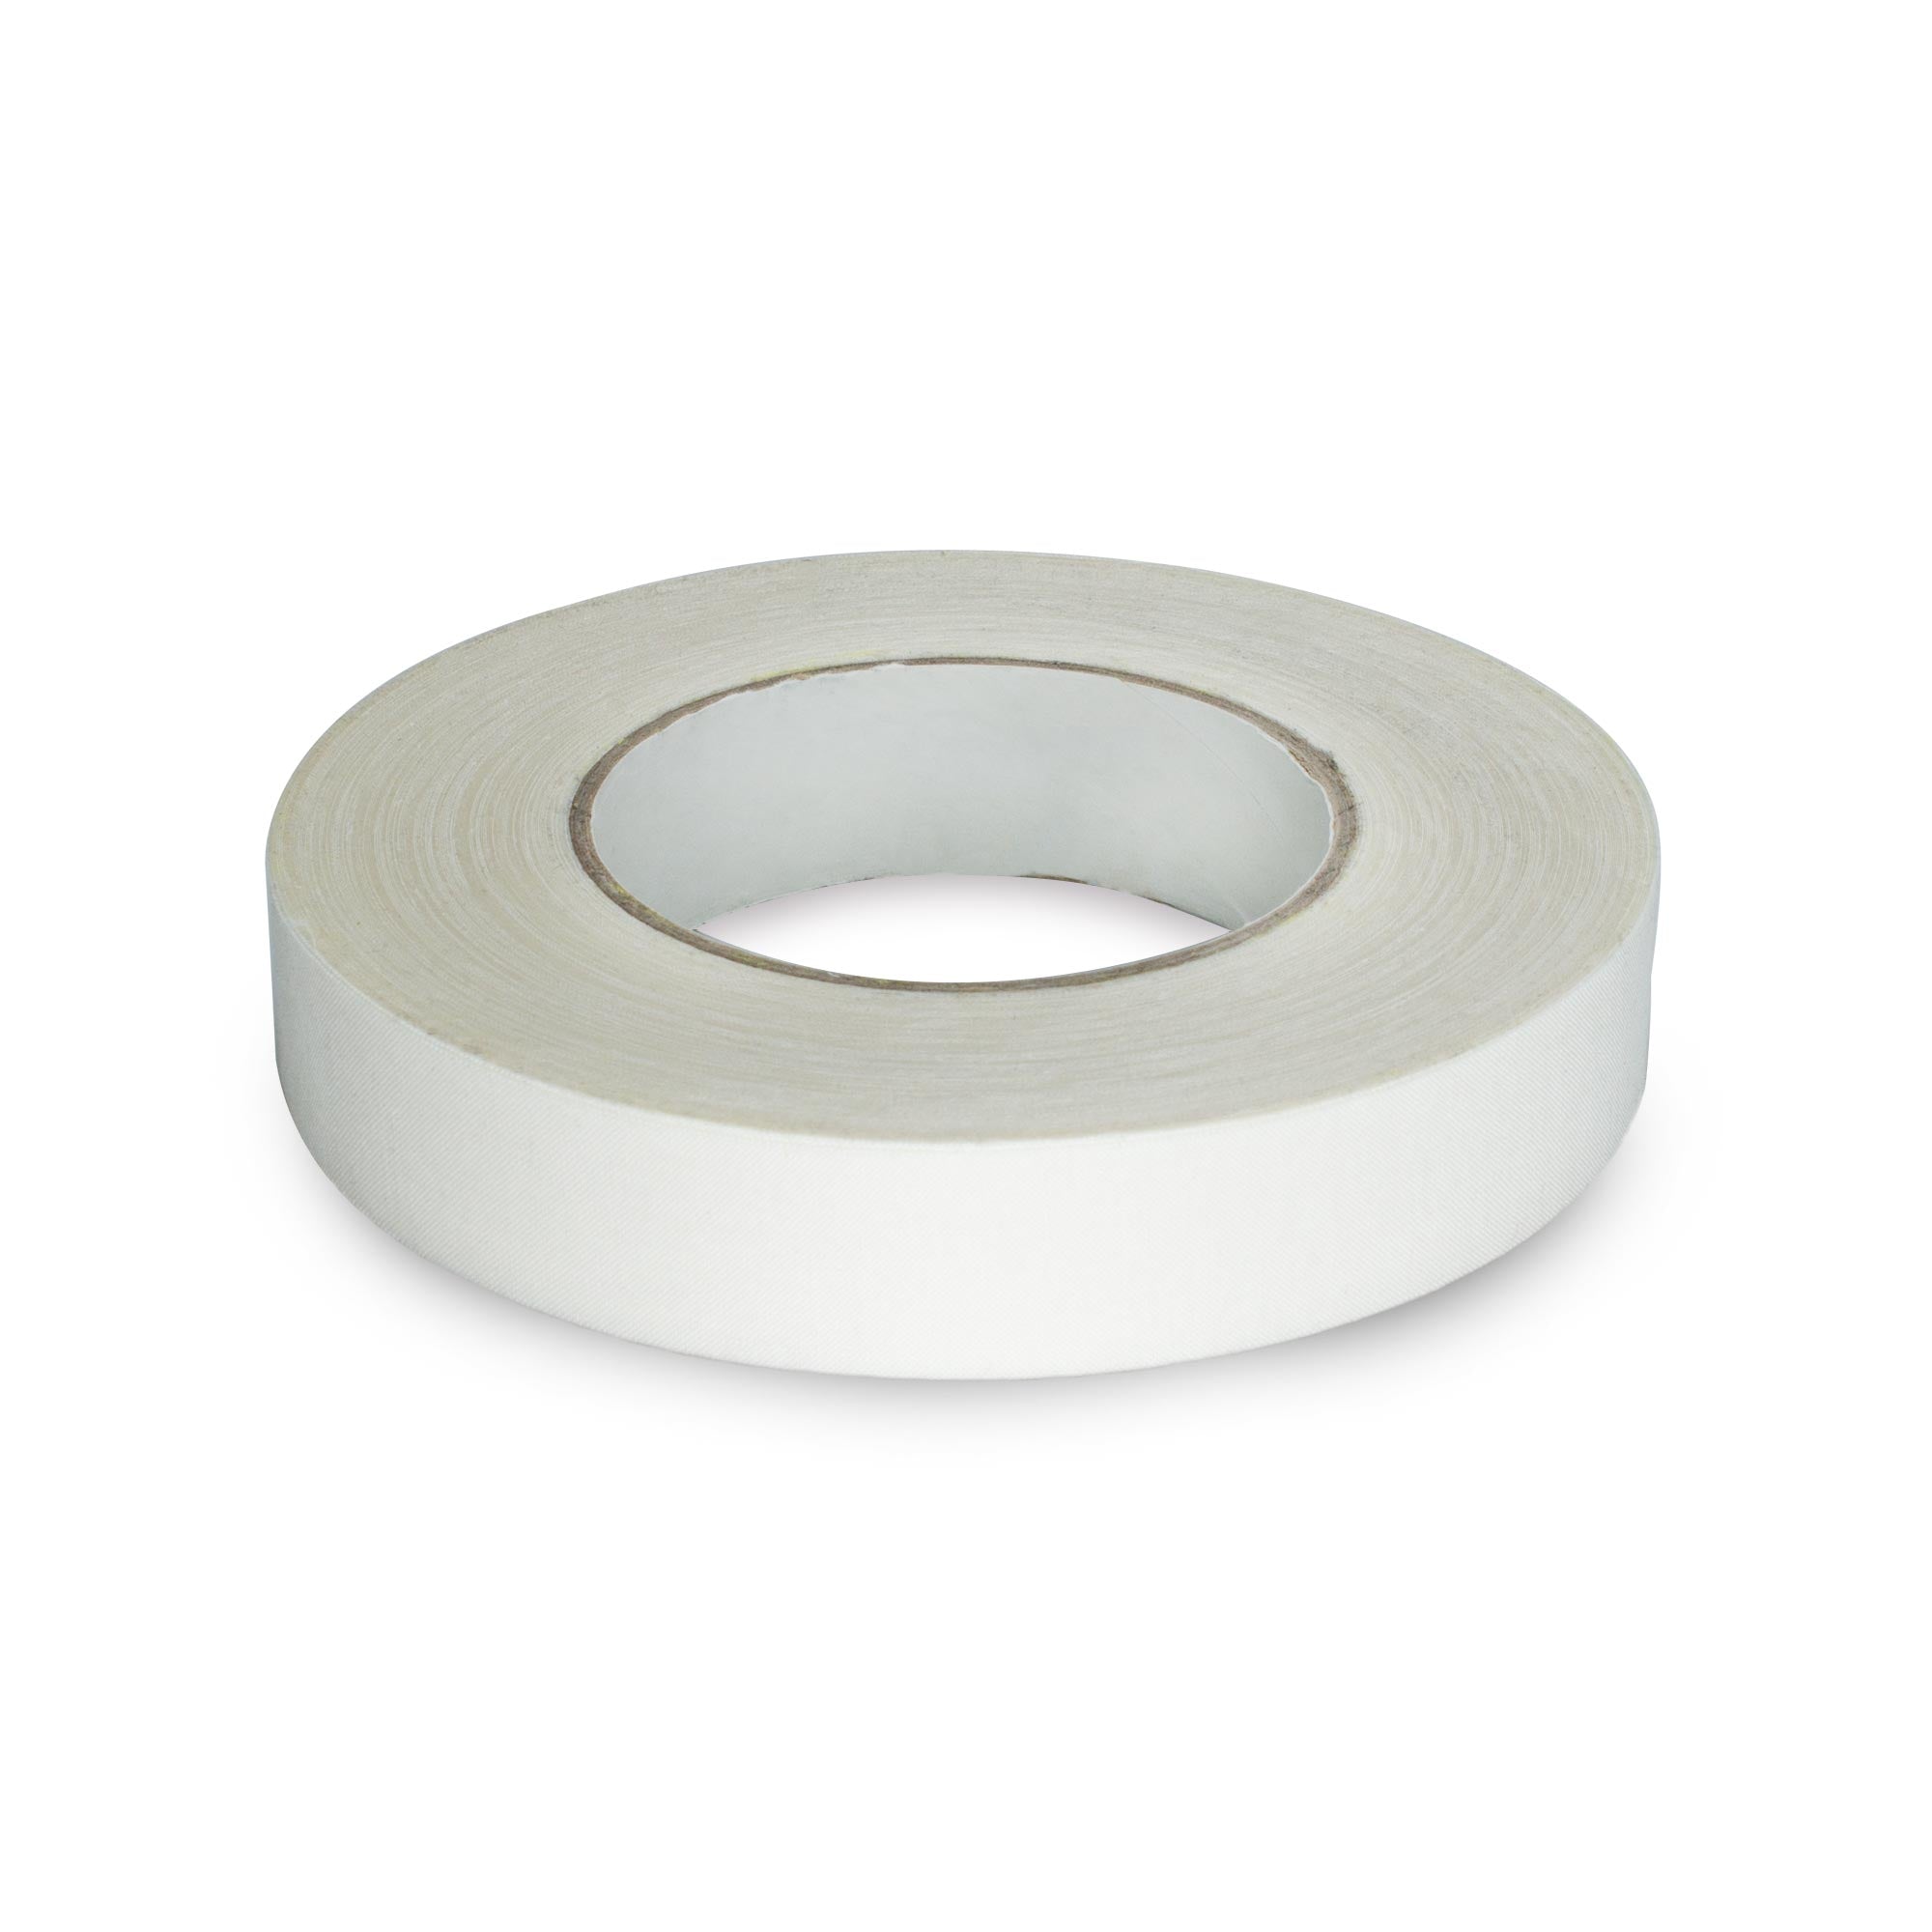 unpackaged roll of white 2.5cm wide tape